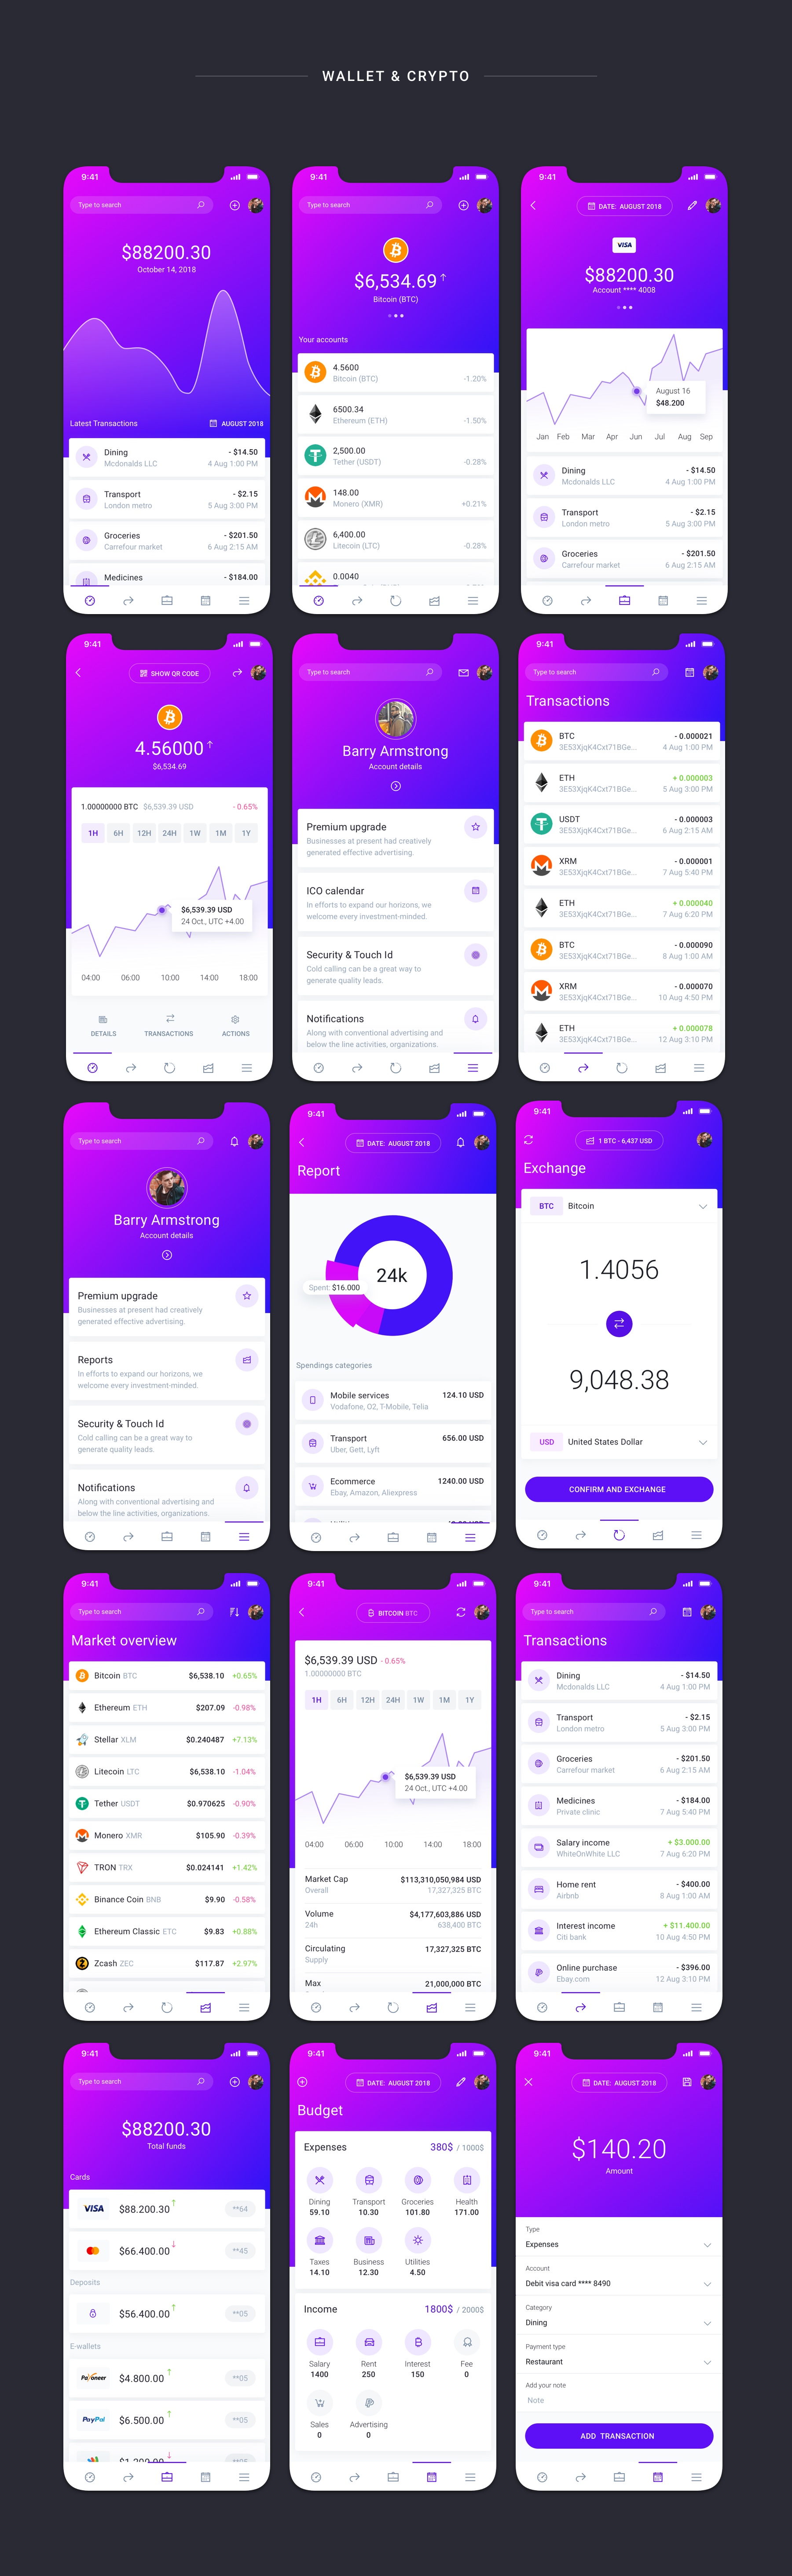 IOWalley - Mobile UI kit for Banking Apps & Crypto Wallets - 10